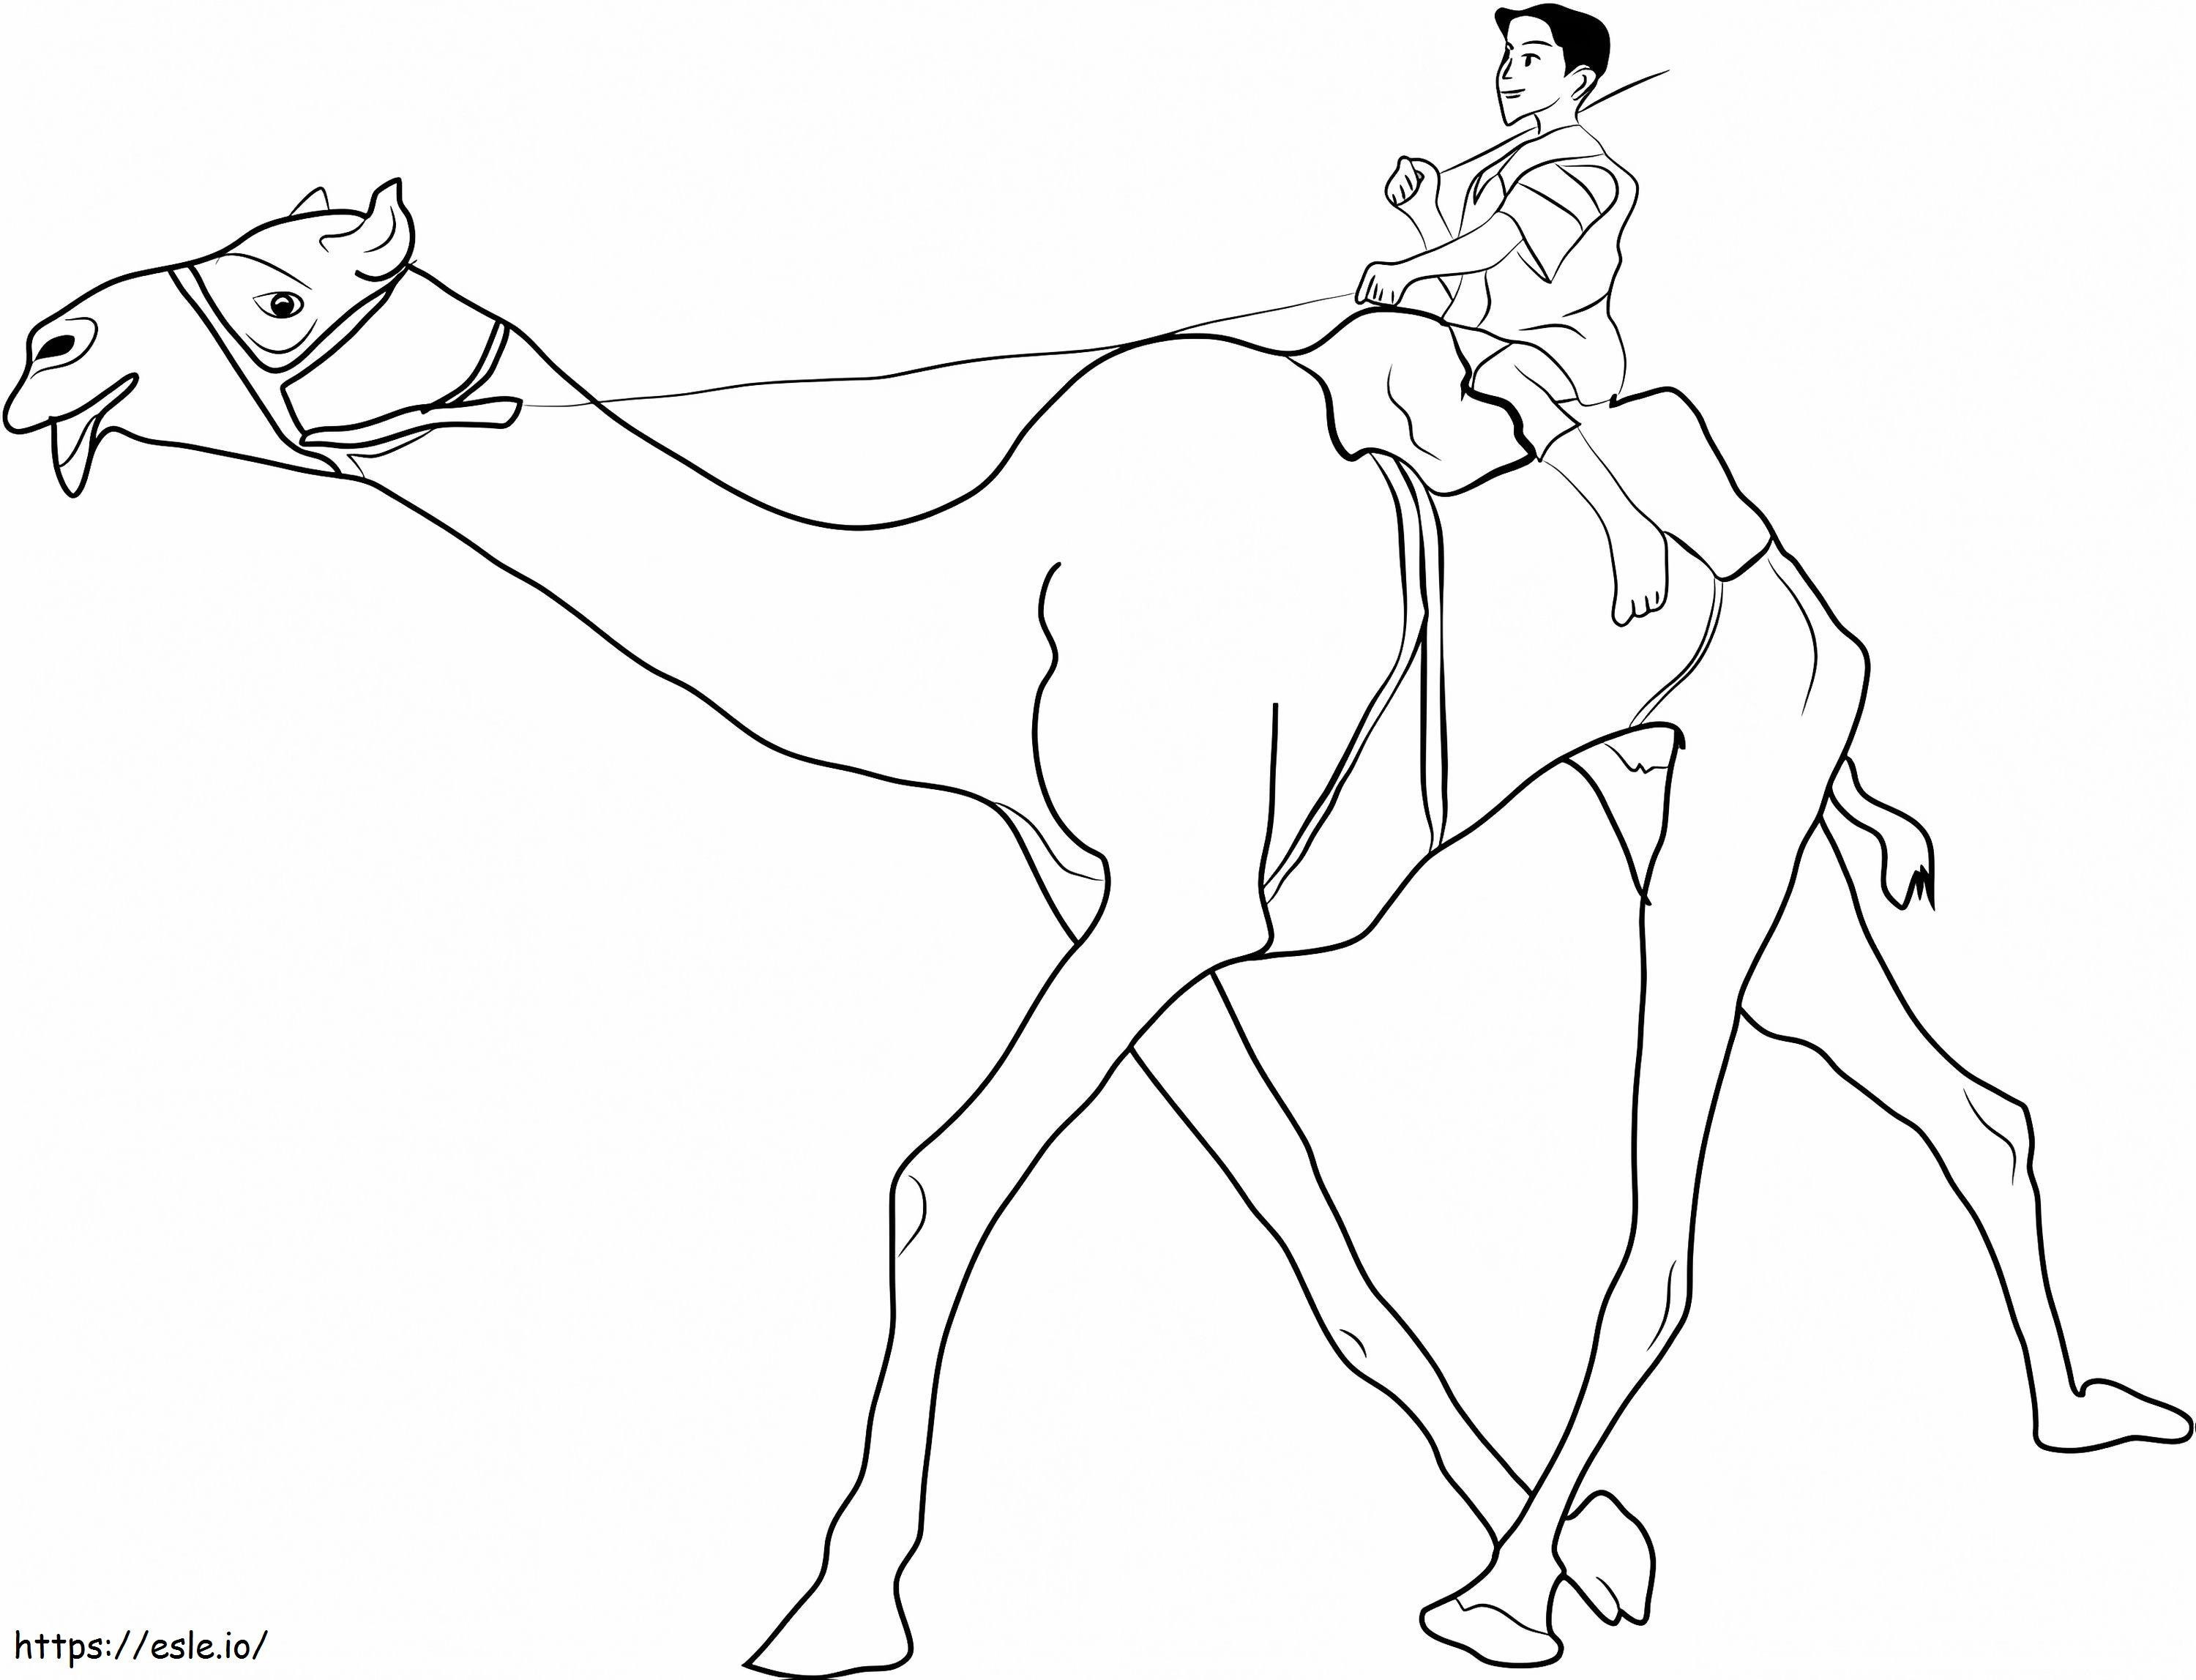 Man Riding Camel A4 coloring page